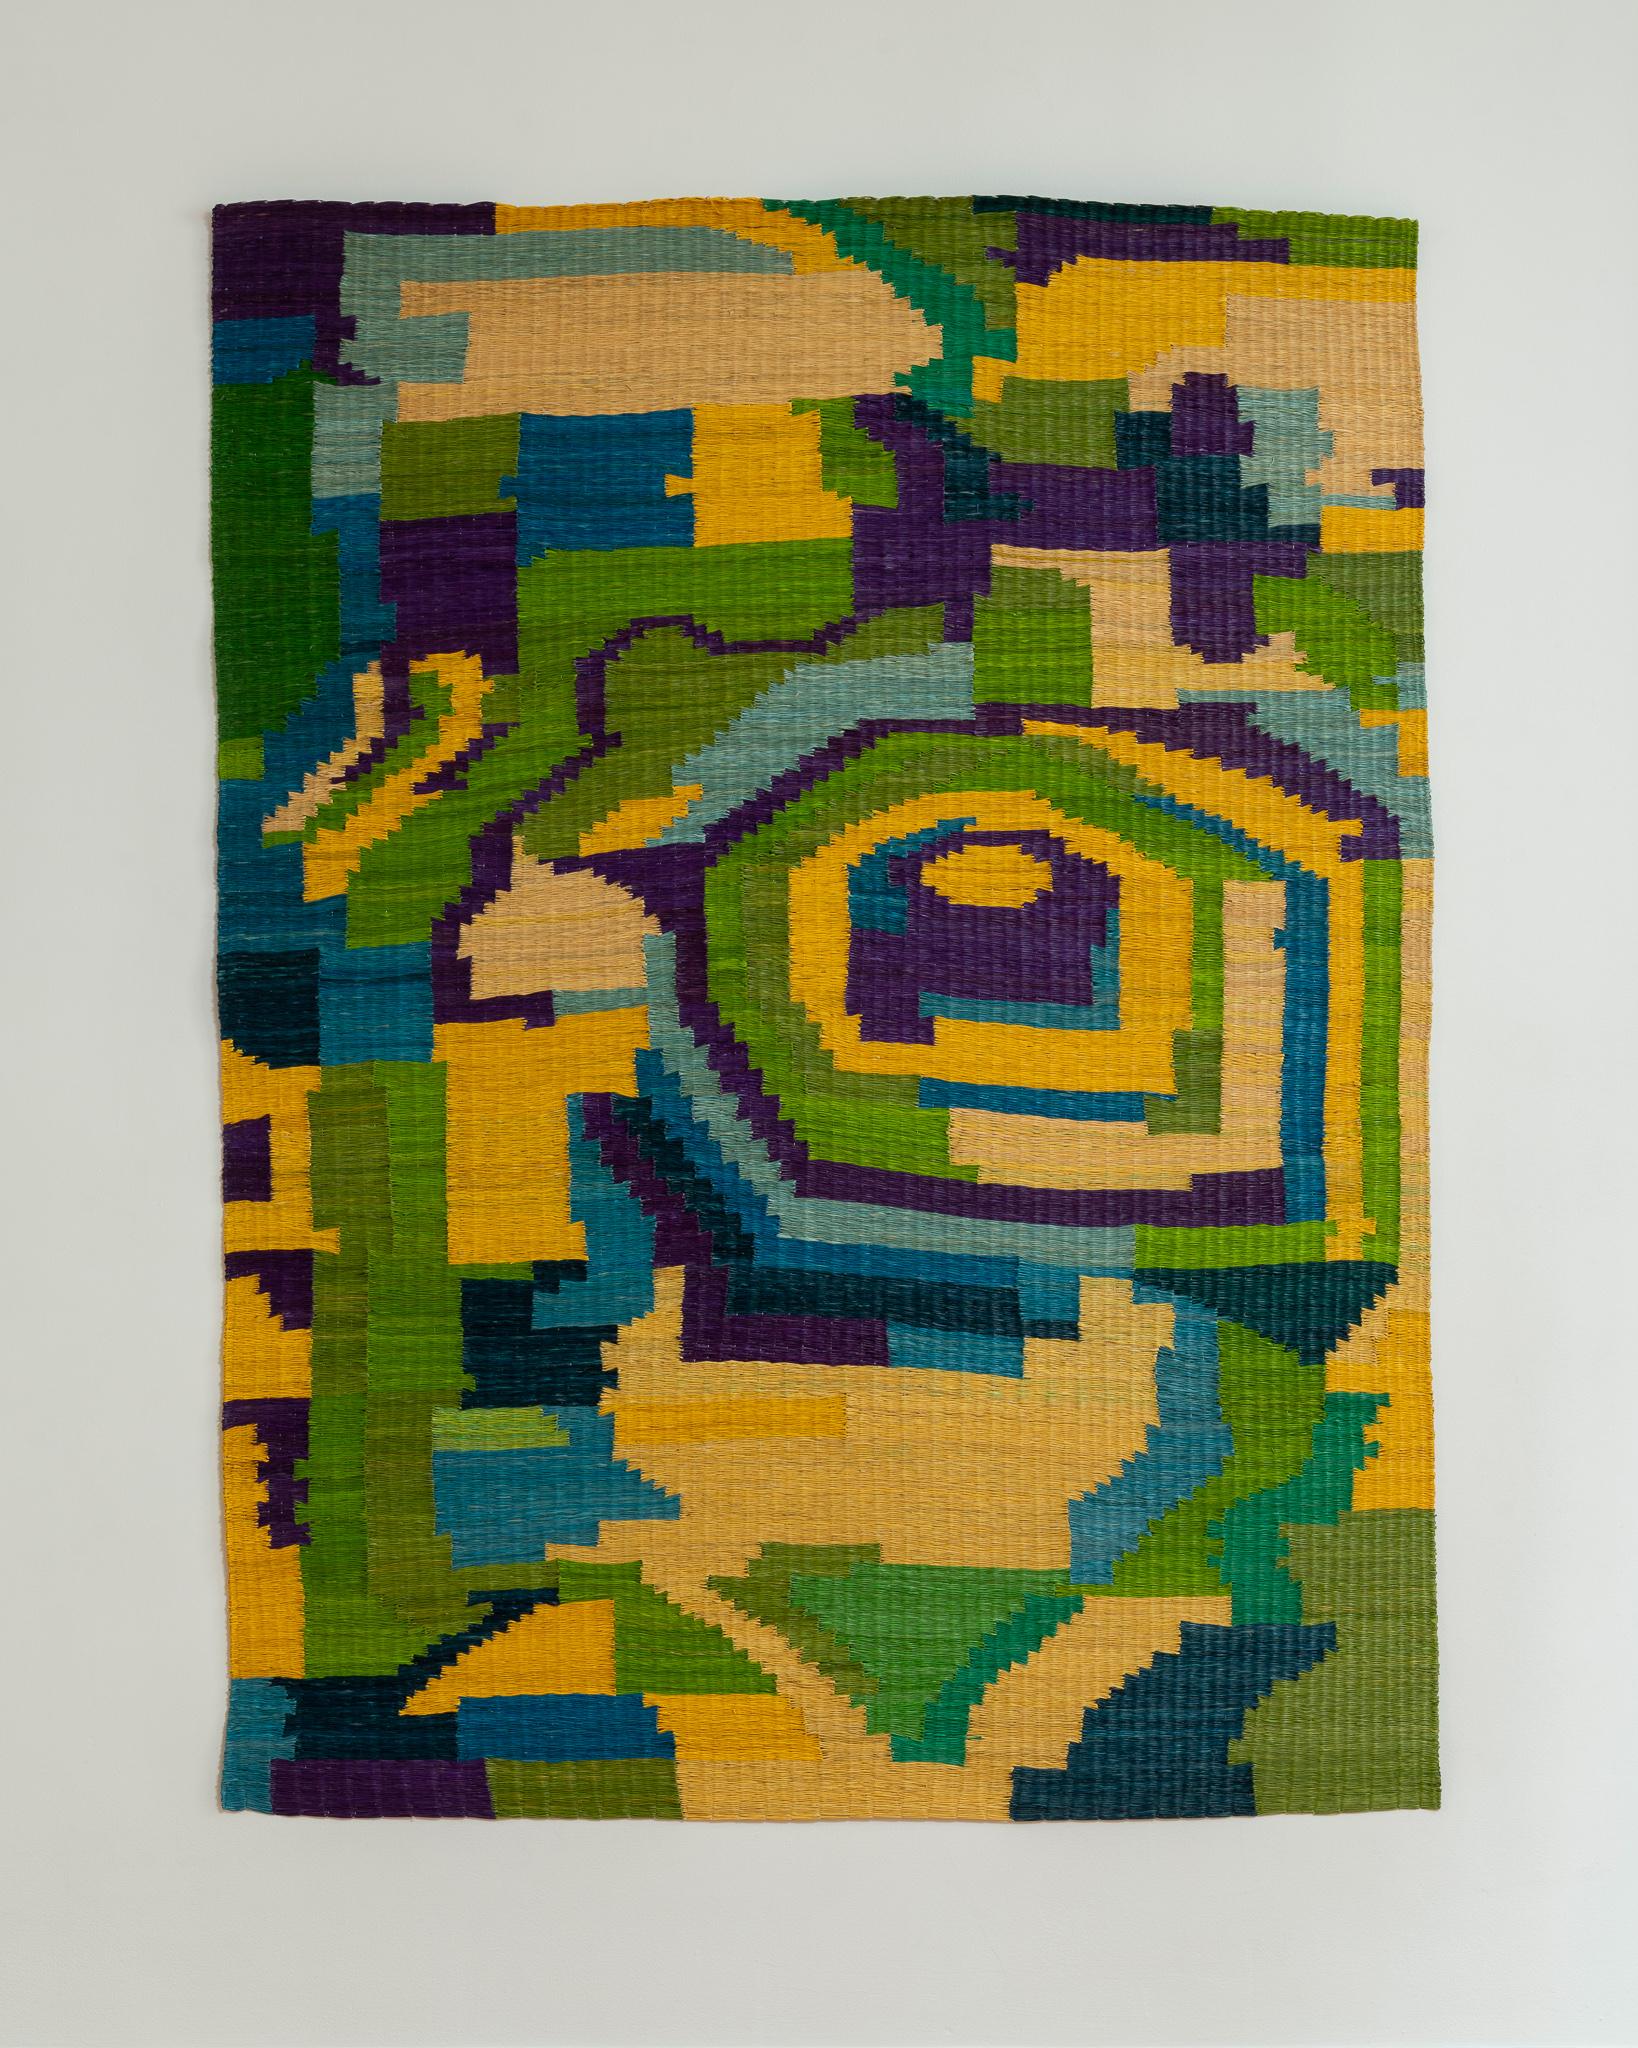 Large, boldly colorful and unique hand-woven decorative wall hanging or floor covering by celebrated New York and Medellín-based artist Chris Wolston. 

Entitled 